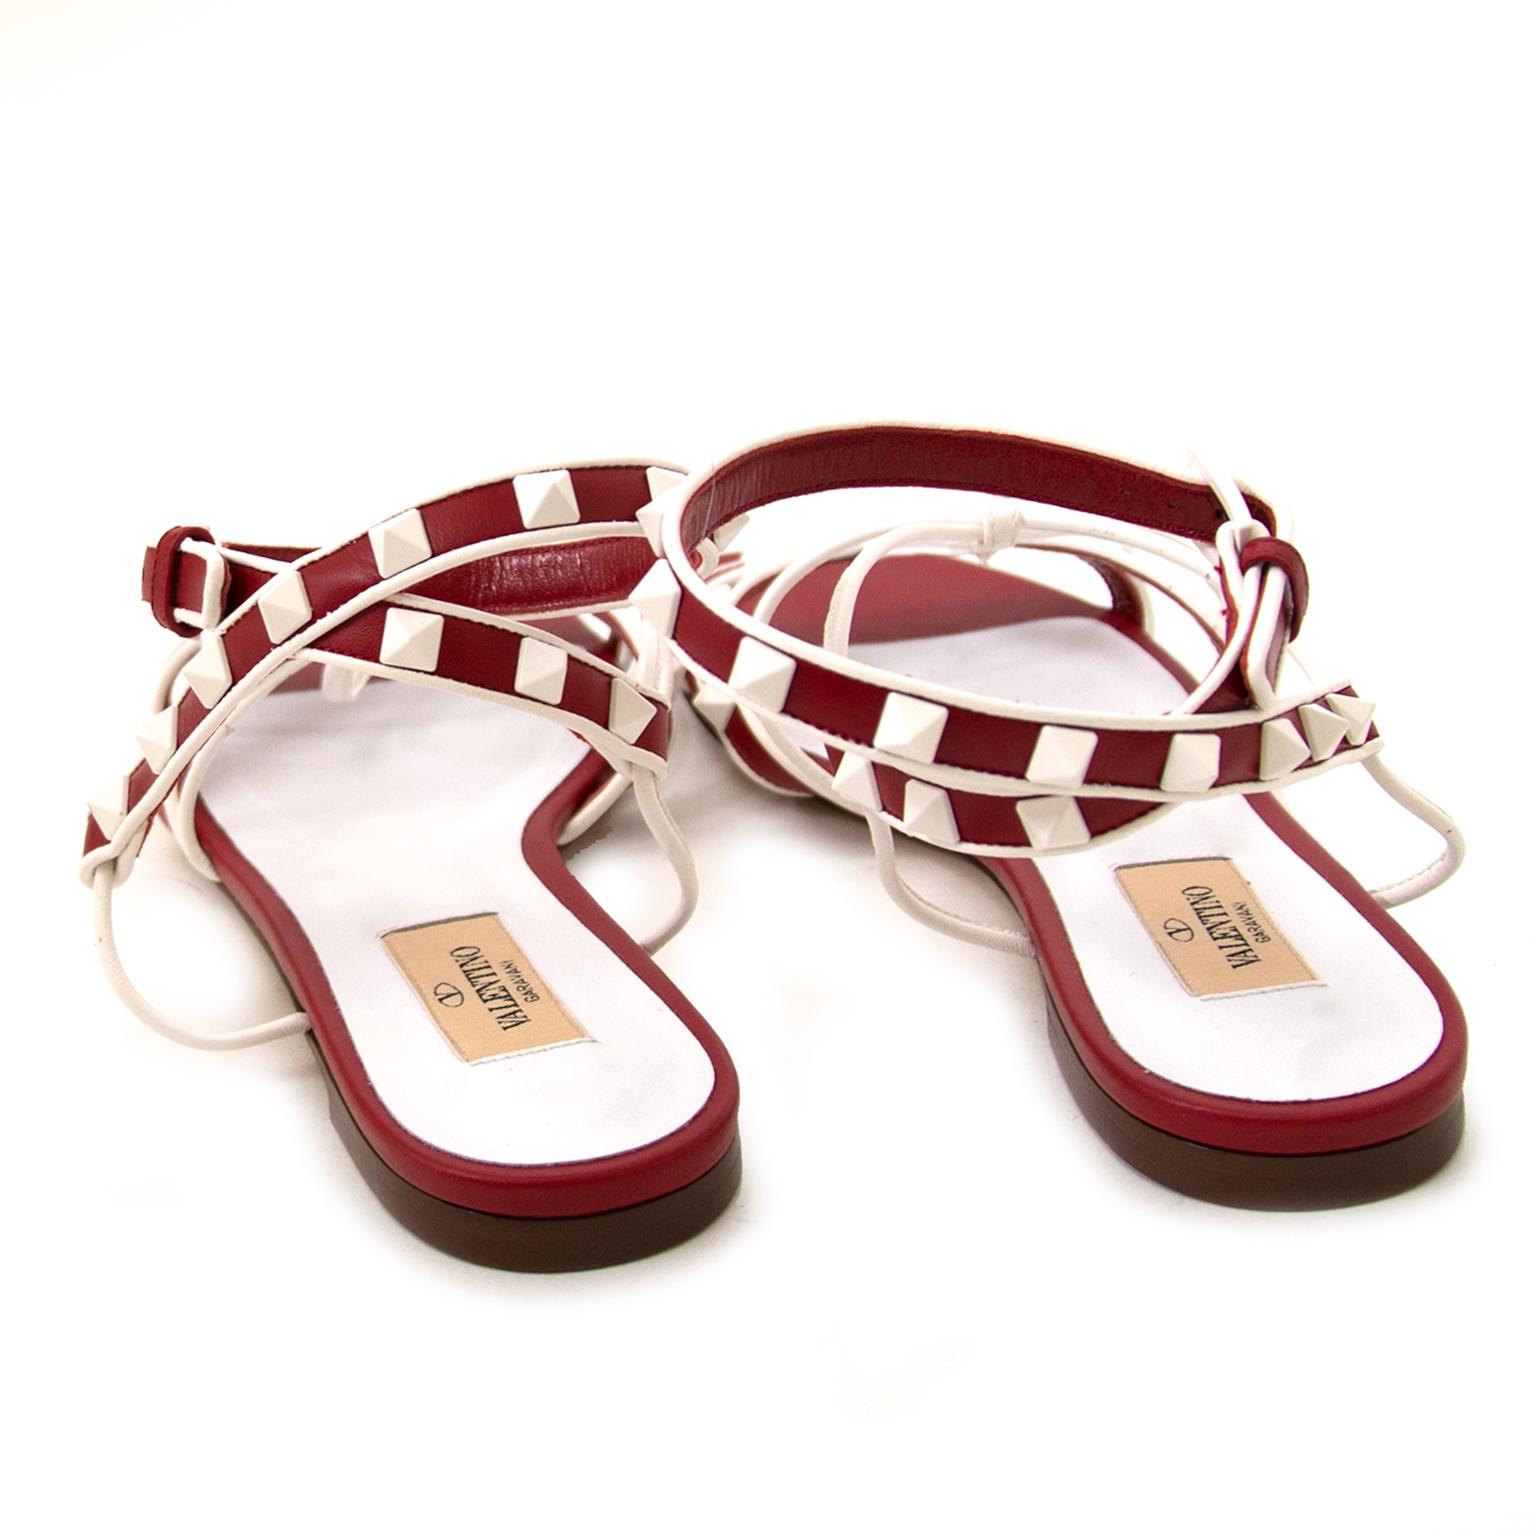 Brand New!

Valentino Red And White Rockstud Sandals - Size 37.5

These rockstud sandals are not to be missed.

The sandals feature different red and white straps with iconic Valentino studs. They have an ankle strap, which makes it easy to take the